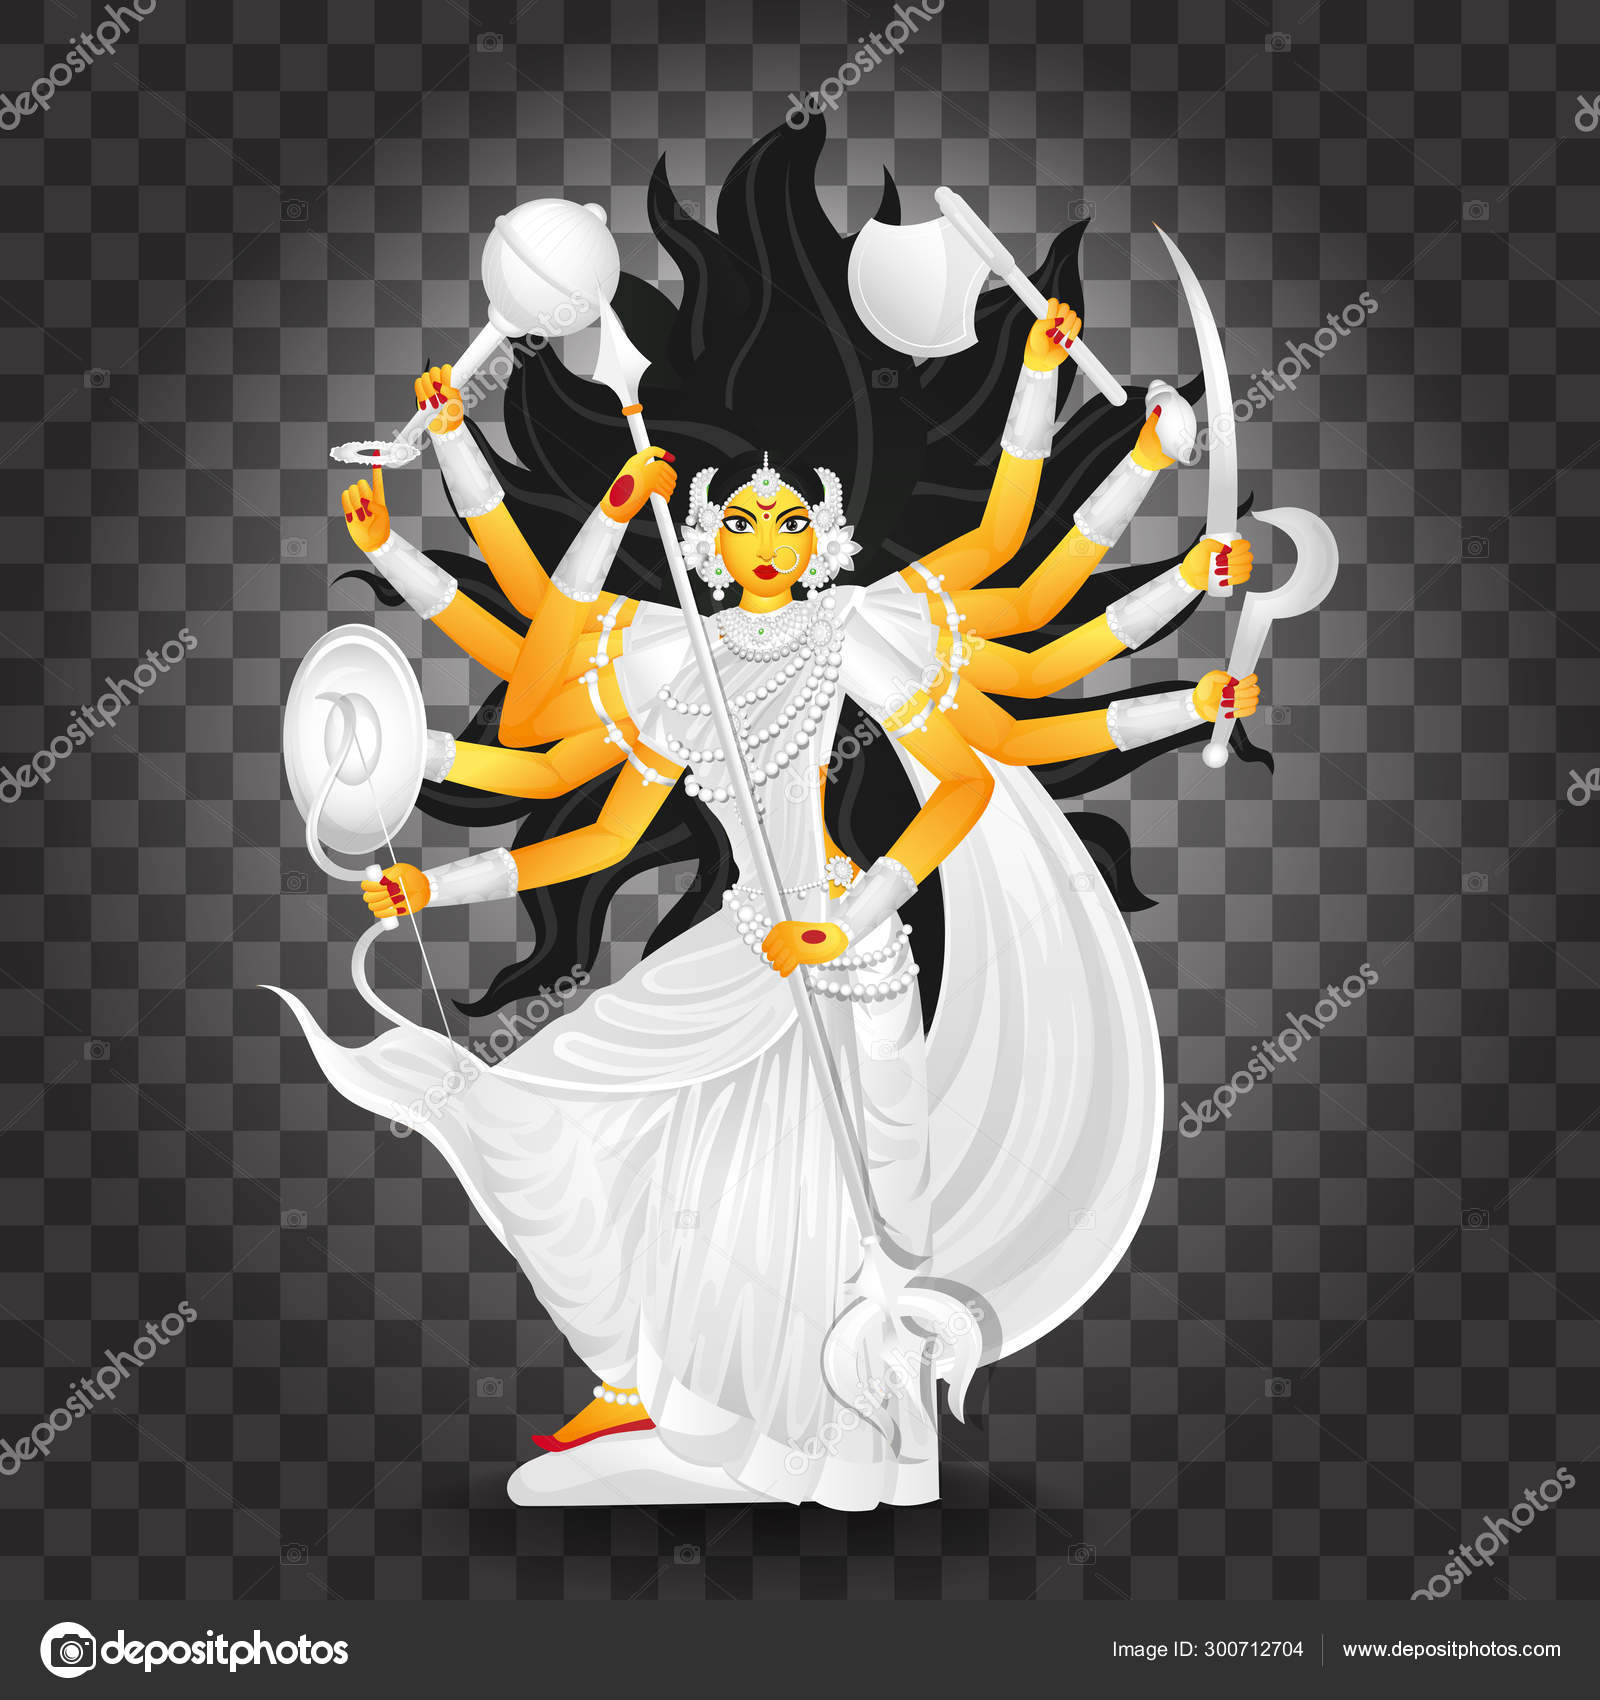 Illustration of Goddess Durga Maa on black png background. Stock Vector  Image by ©alliesinteract #300712704